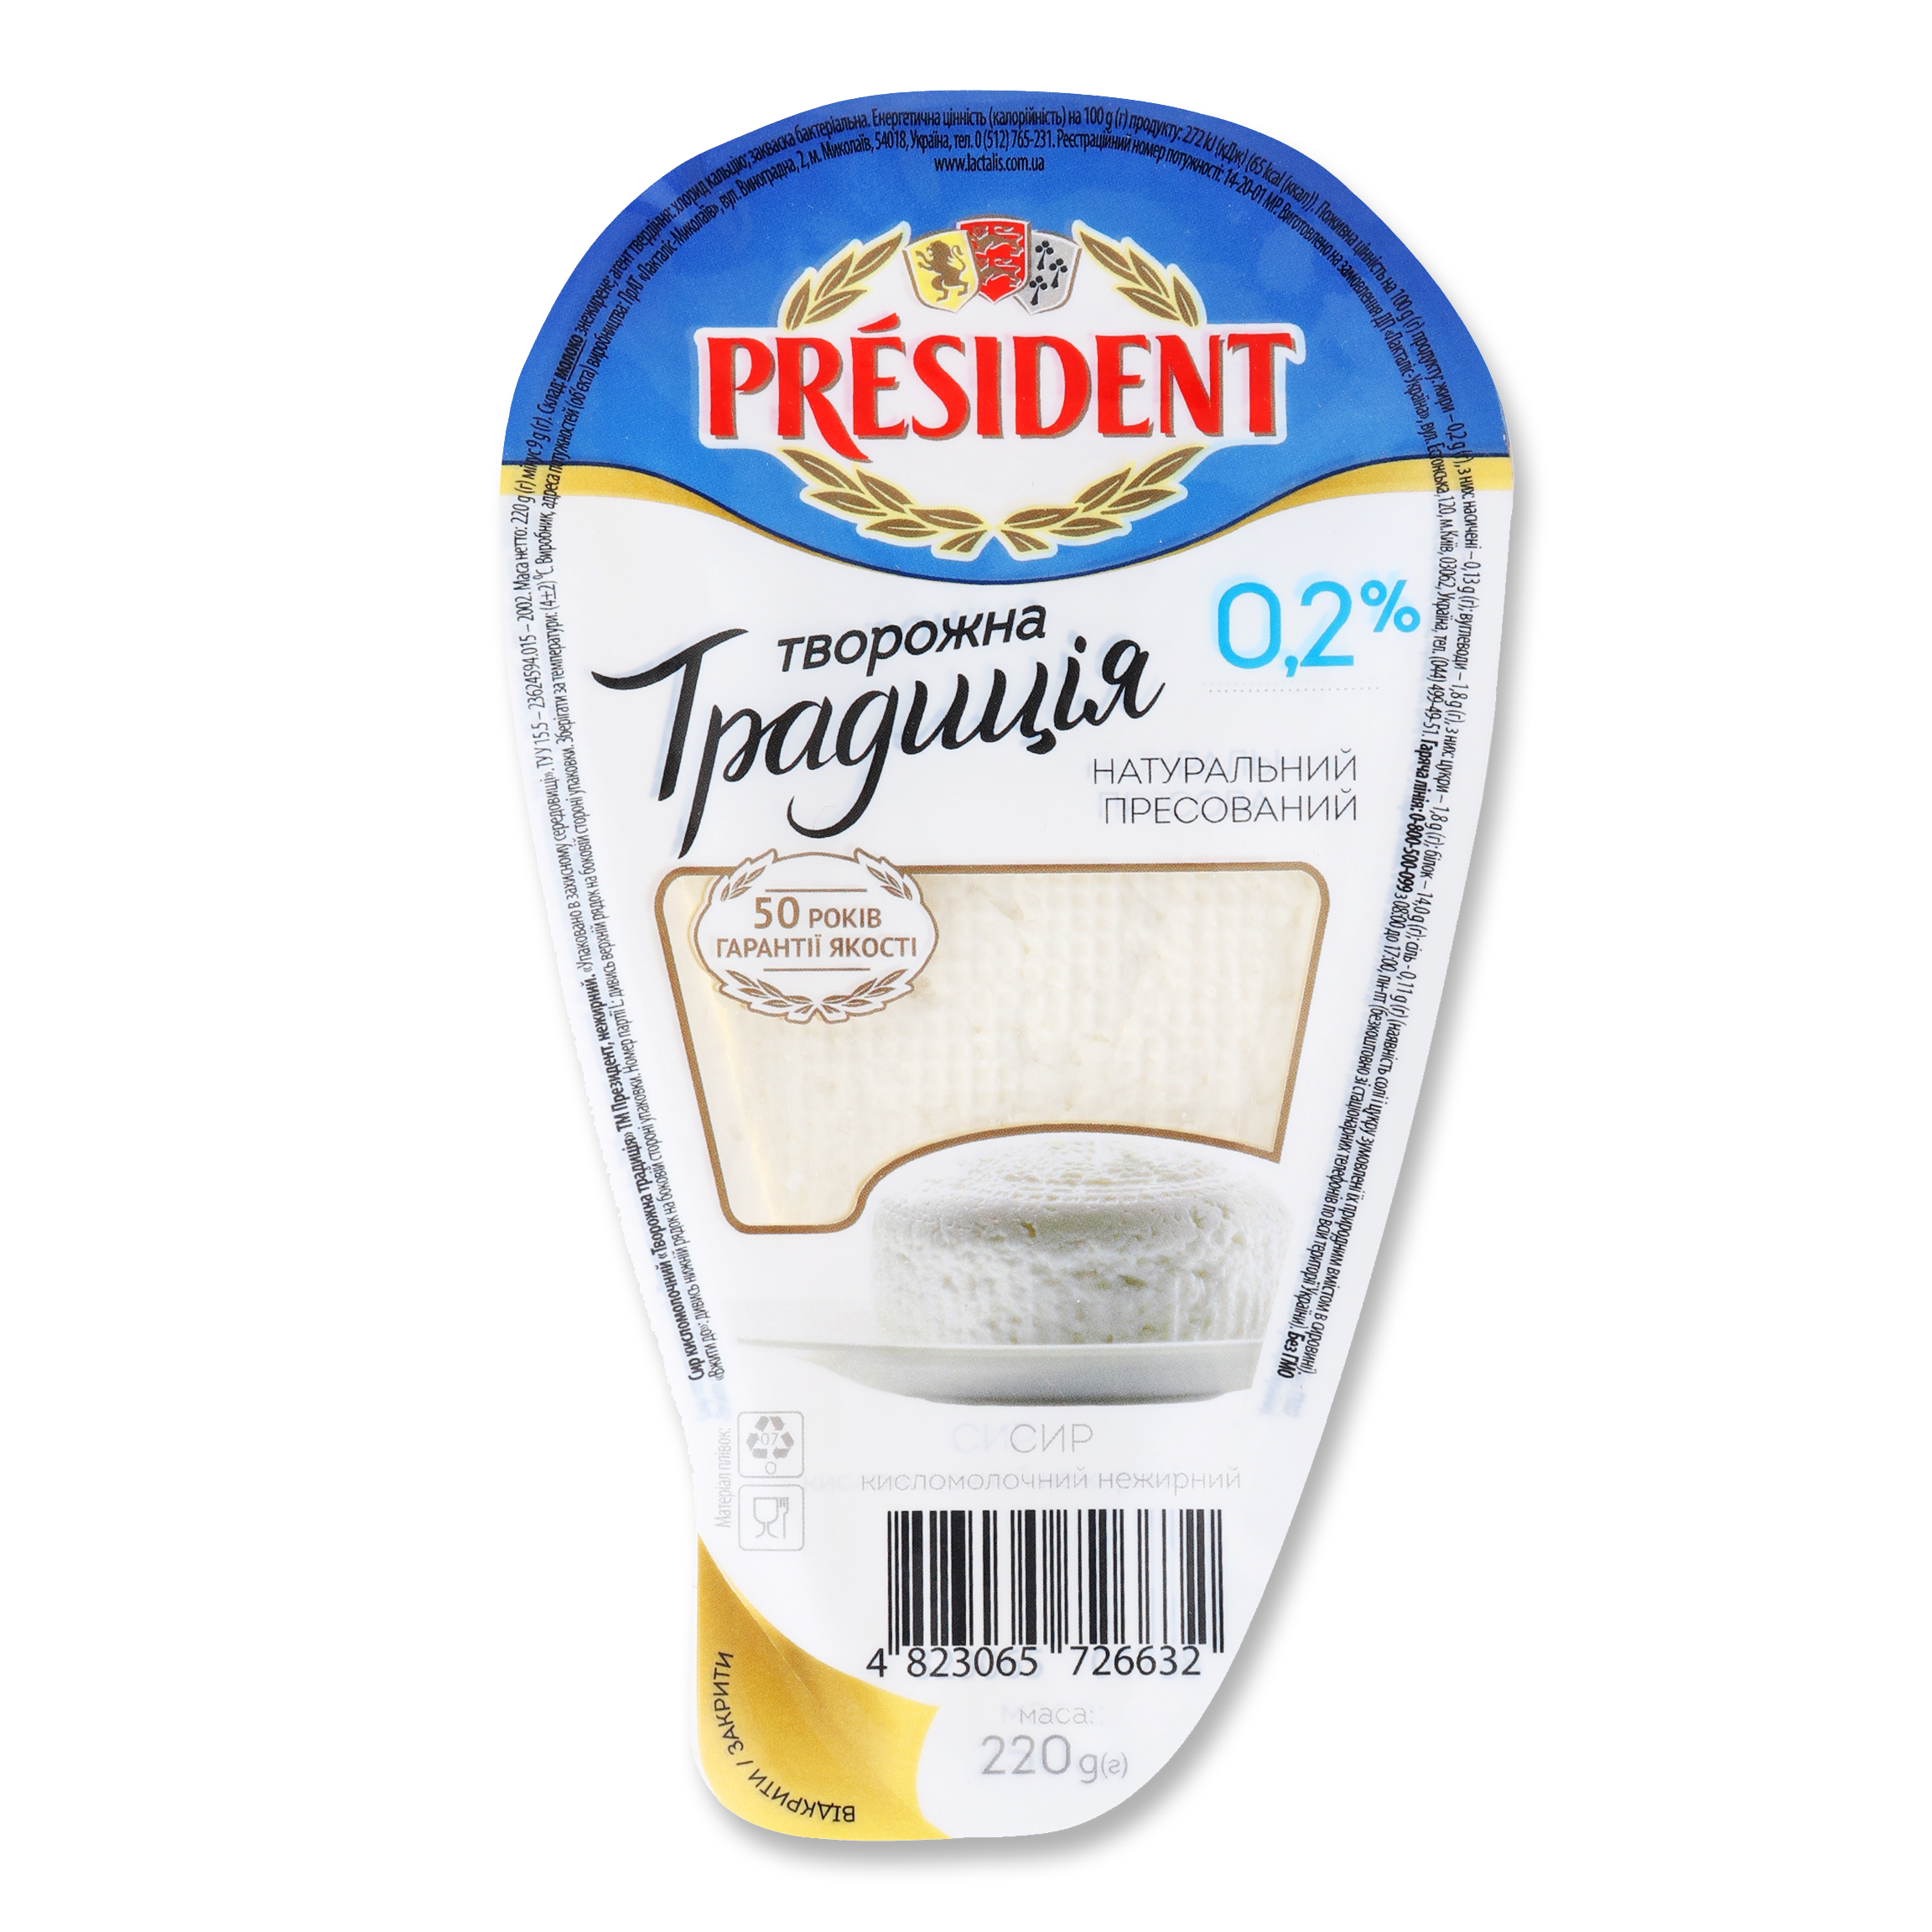 Fermented milk cheese President Cottage cheese tradition 0.2% 220g